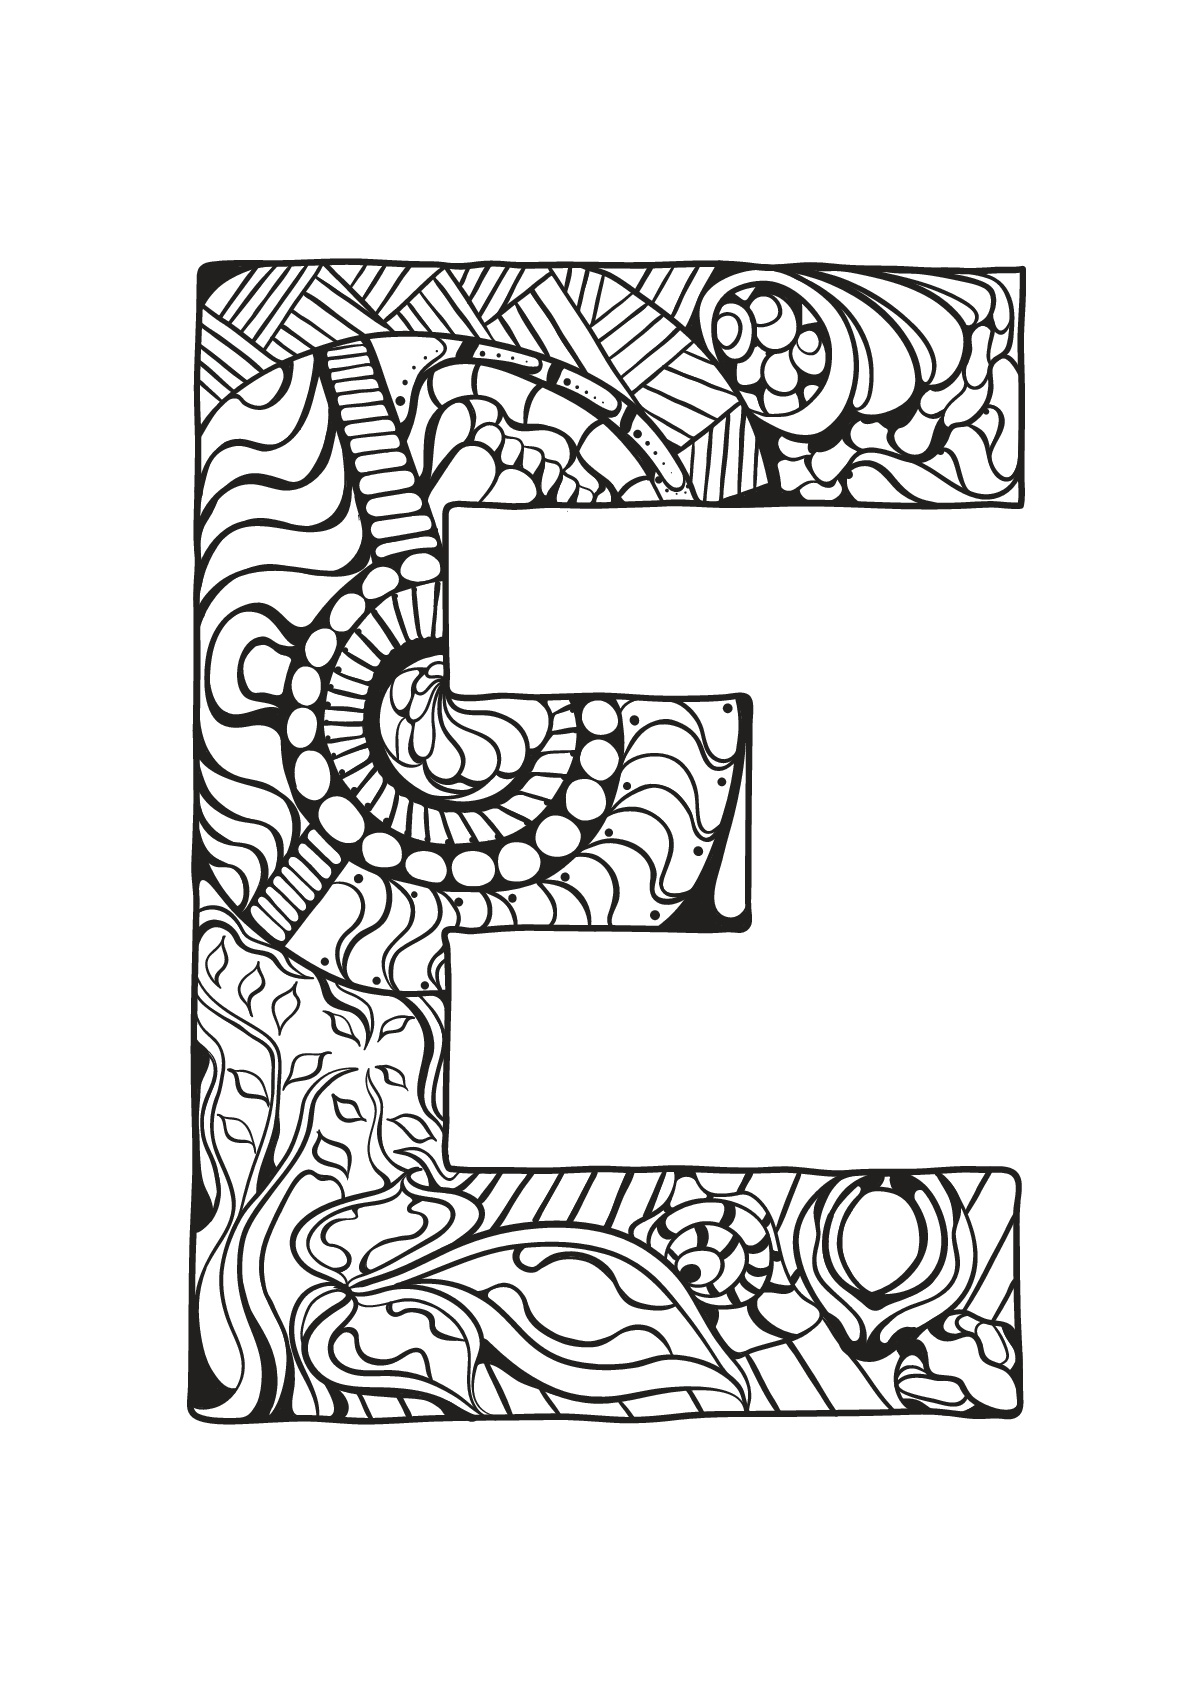 Alphabet free to color for children - Alphabet Kids Coloring Pages